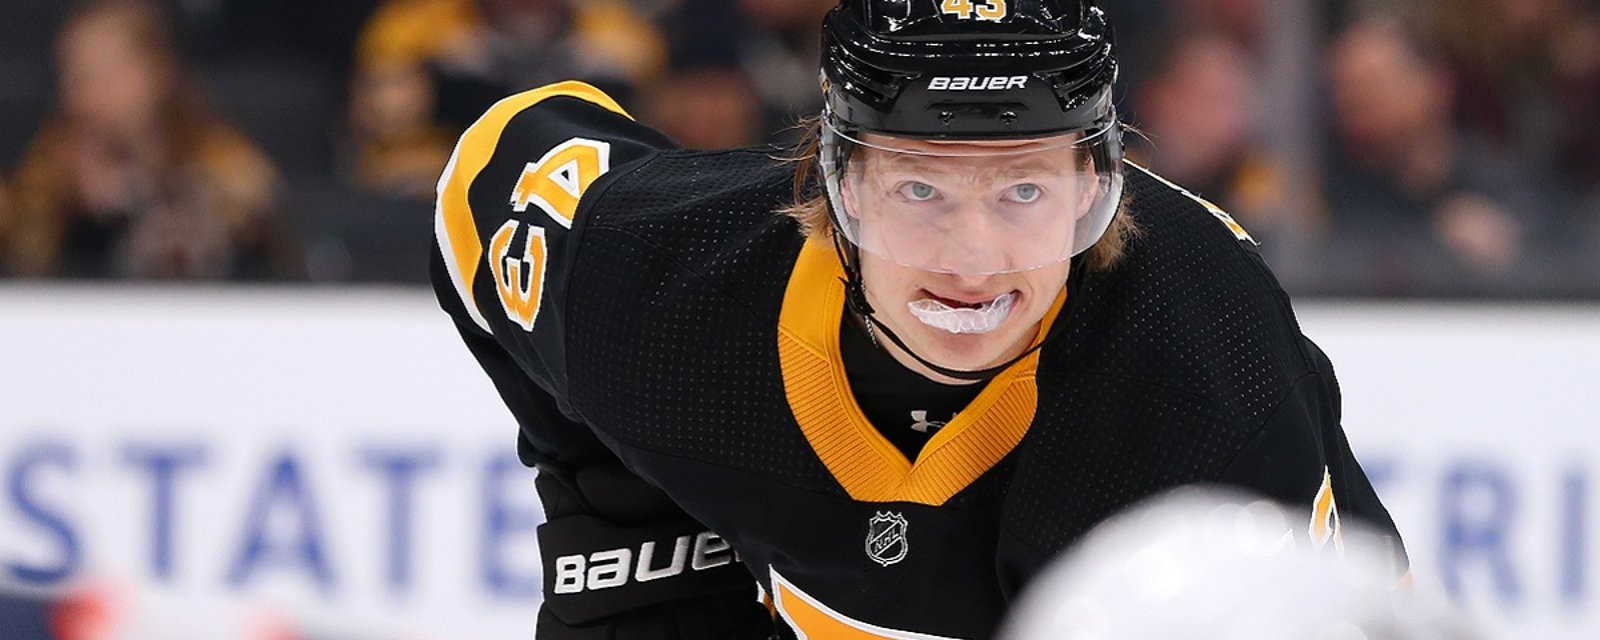 Bruins have traded Danton Heinen in a 1 for 1 deal.